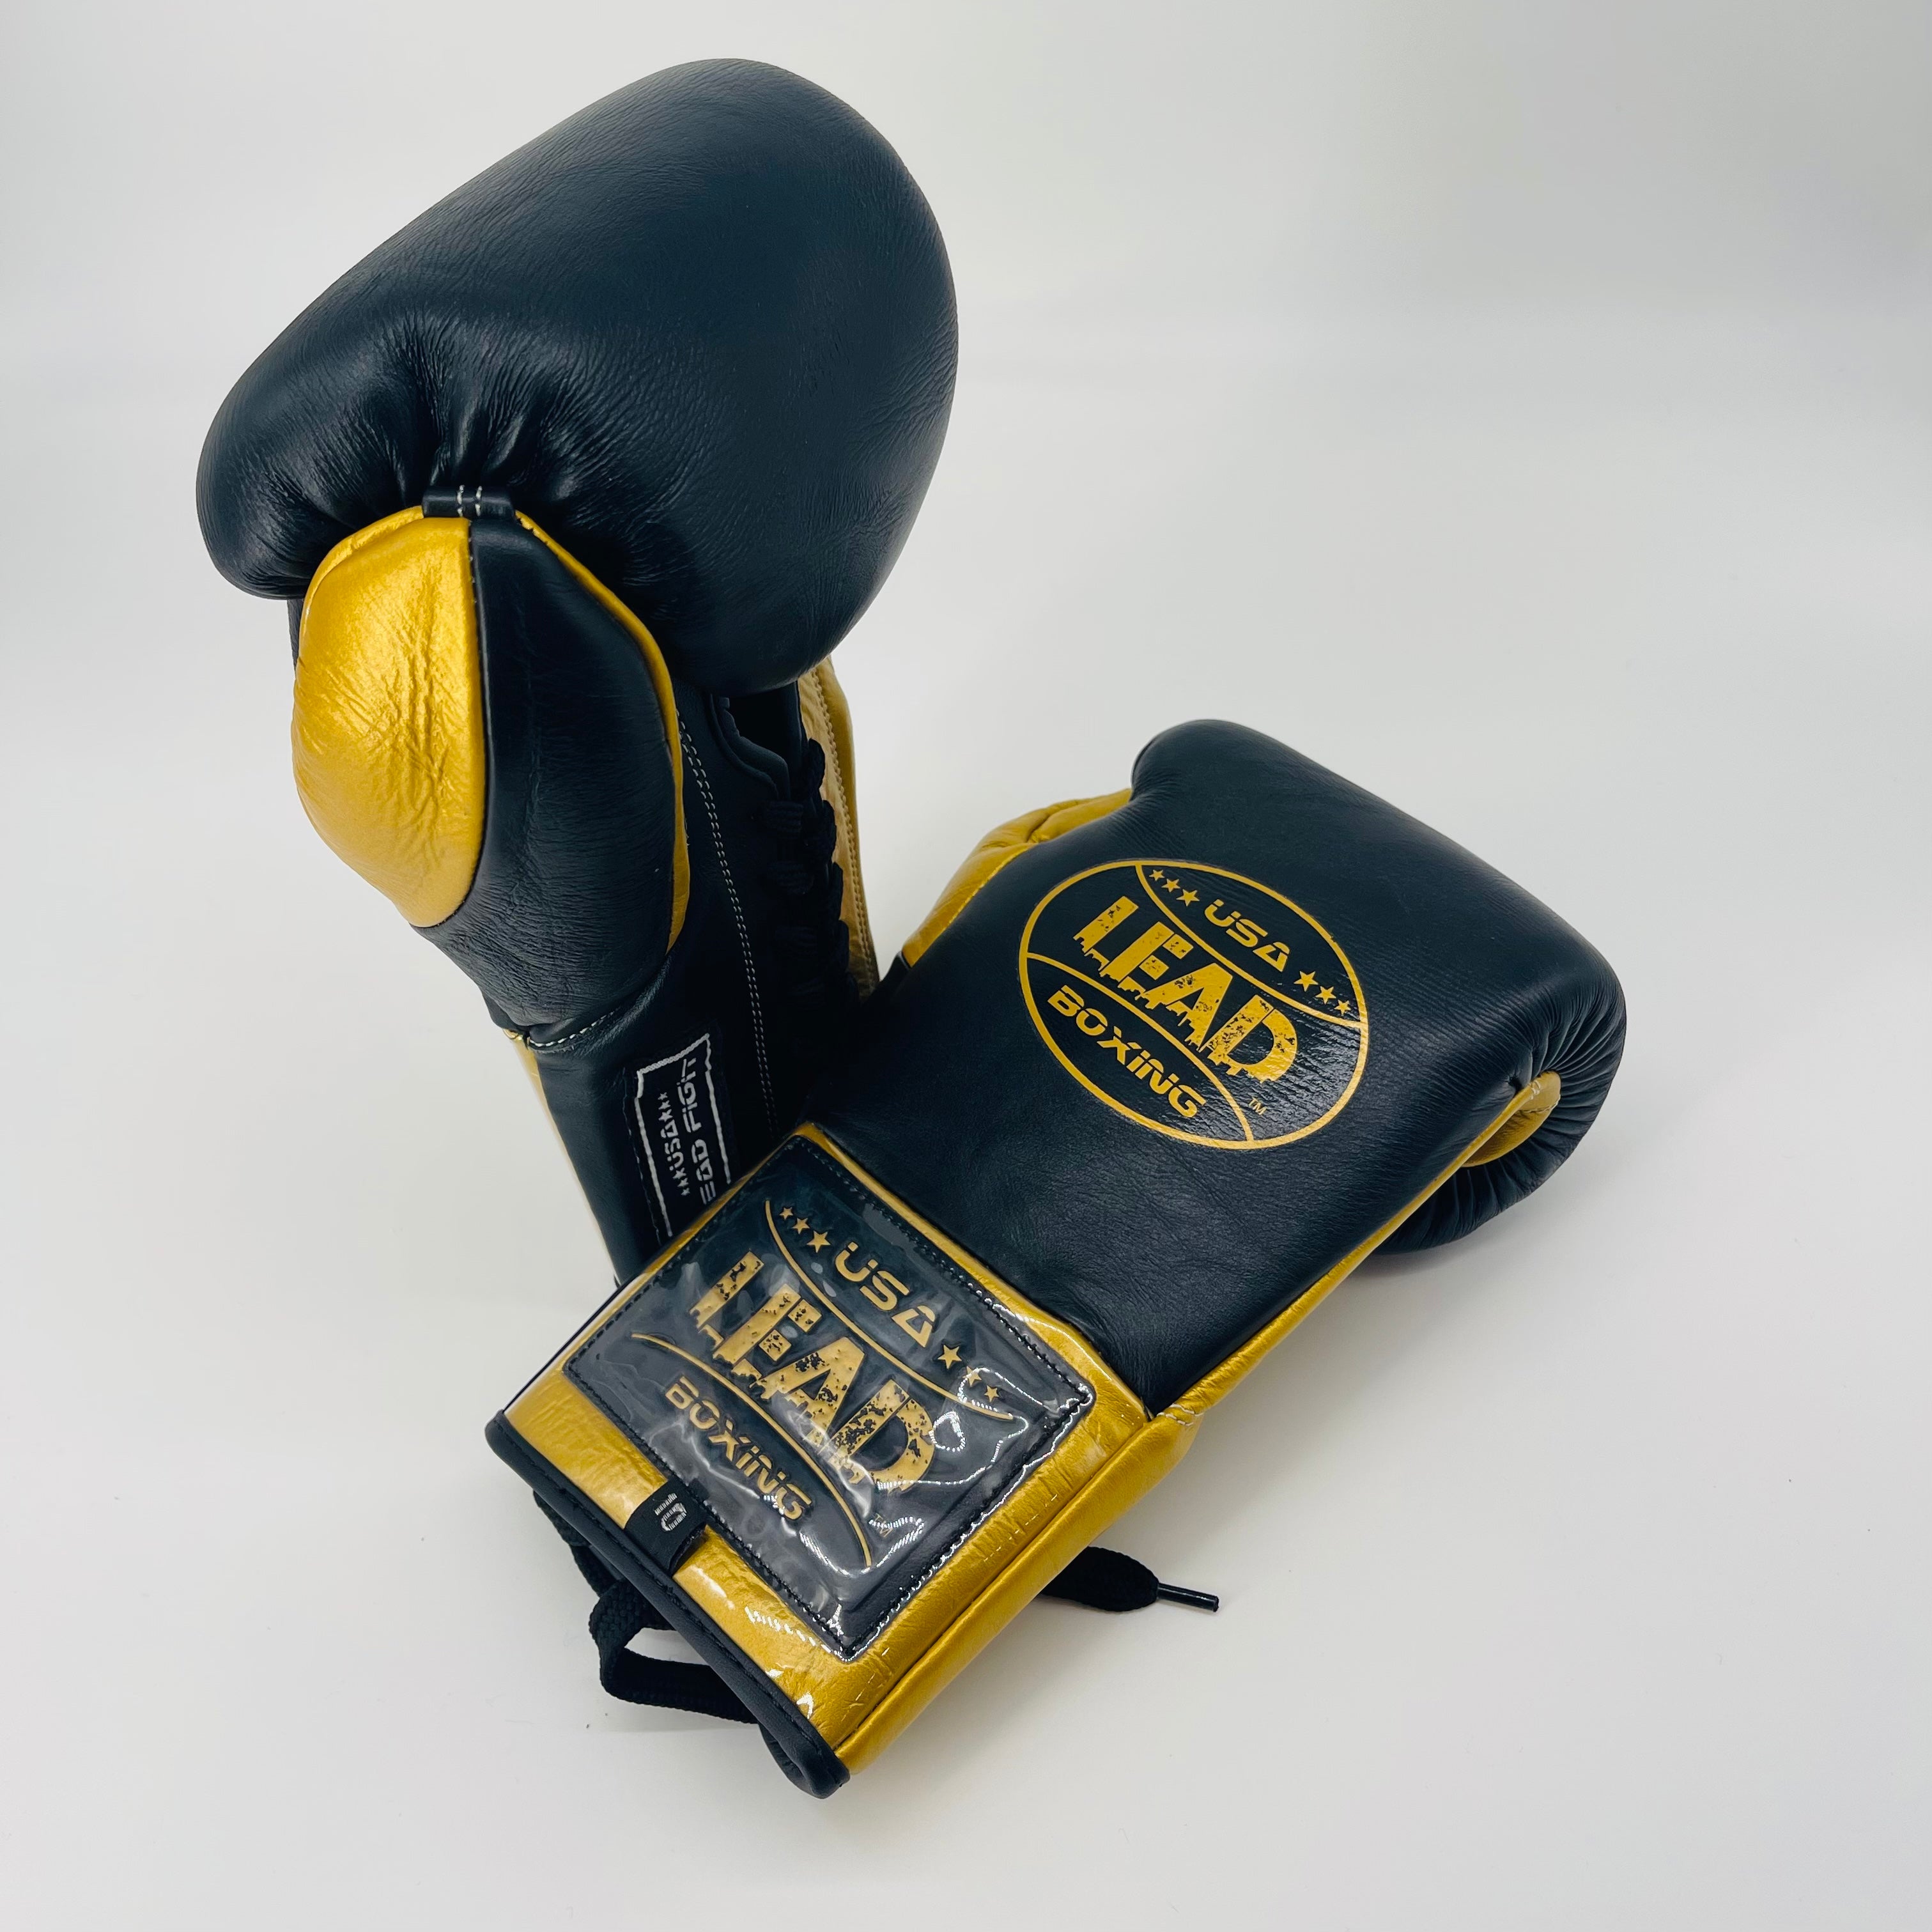 LEAD Boxing Fight Gloves (Black/Gold)